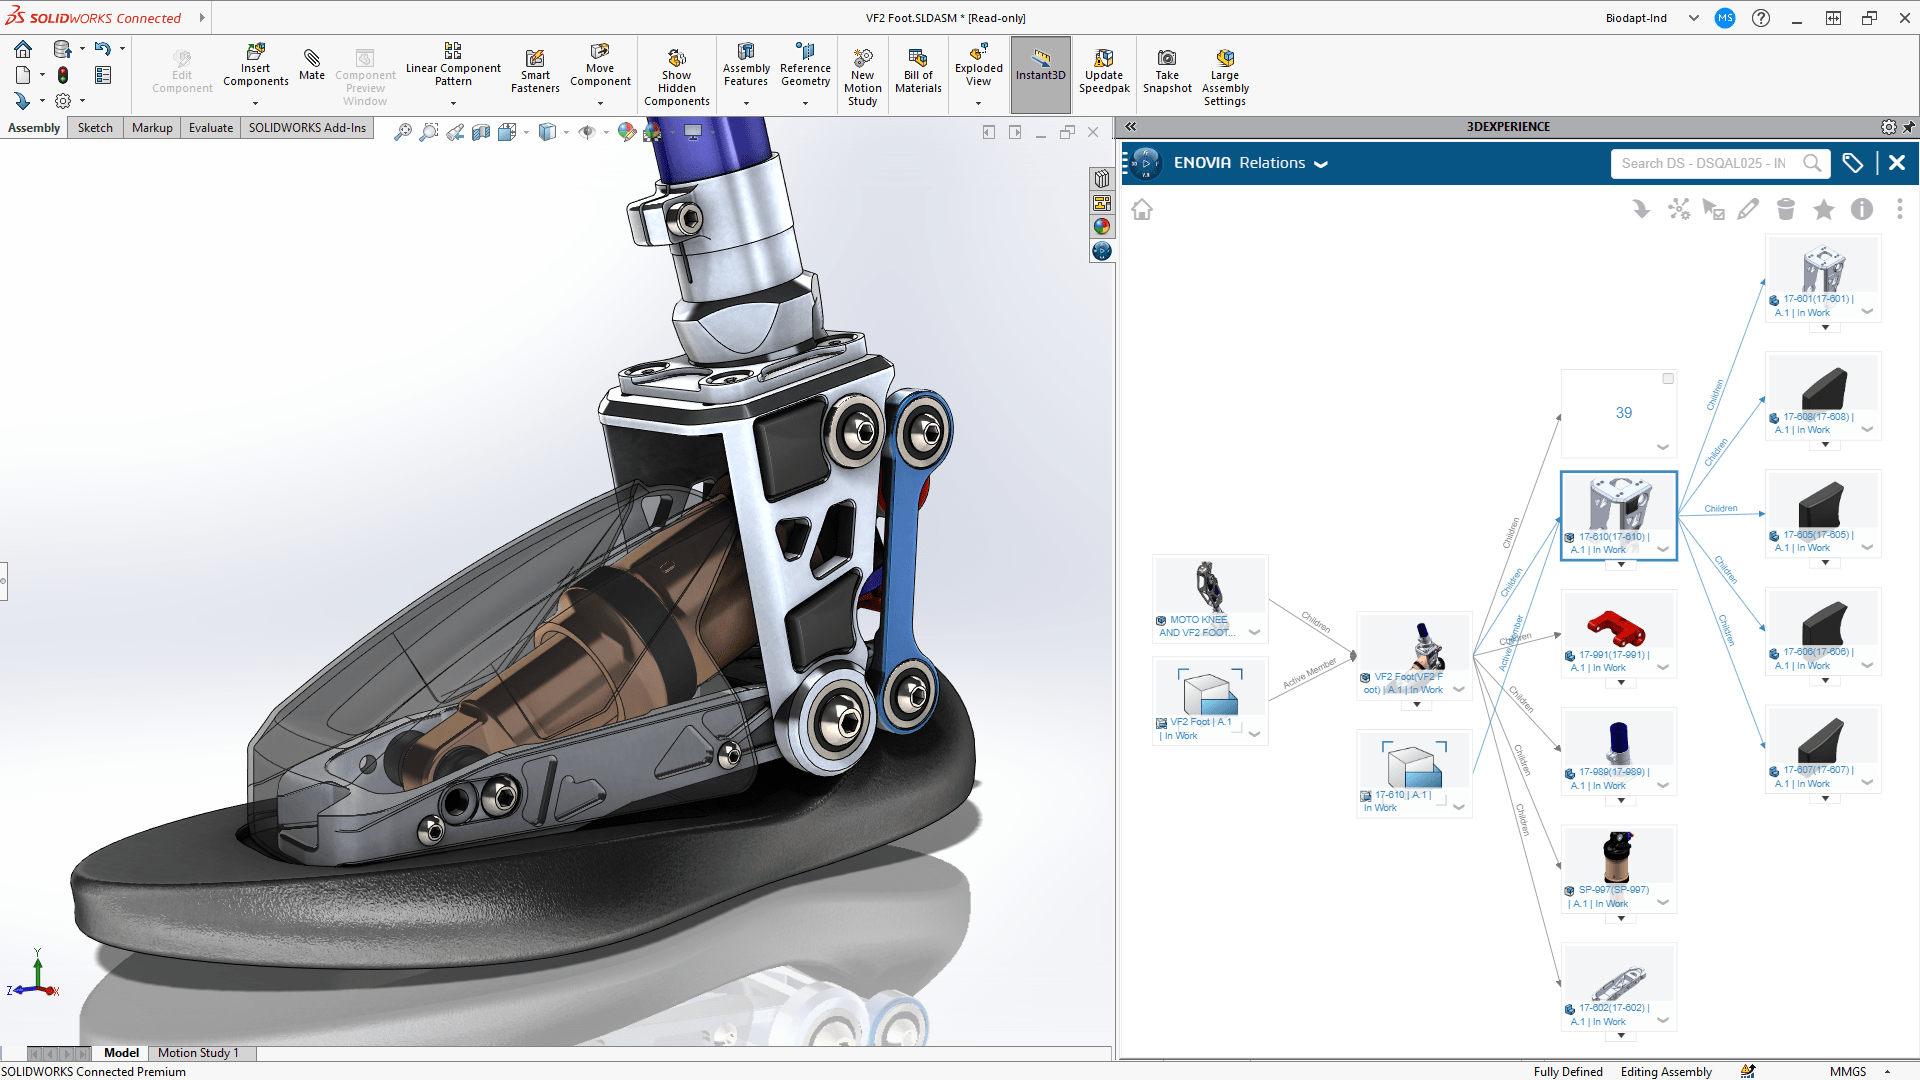 SOLIDWORKS 2021